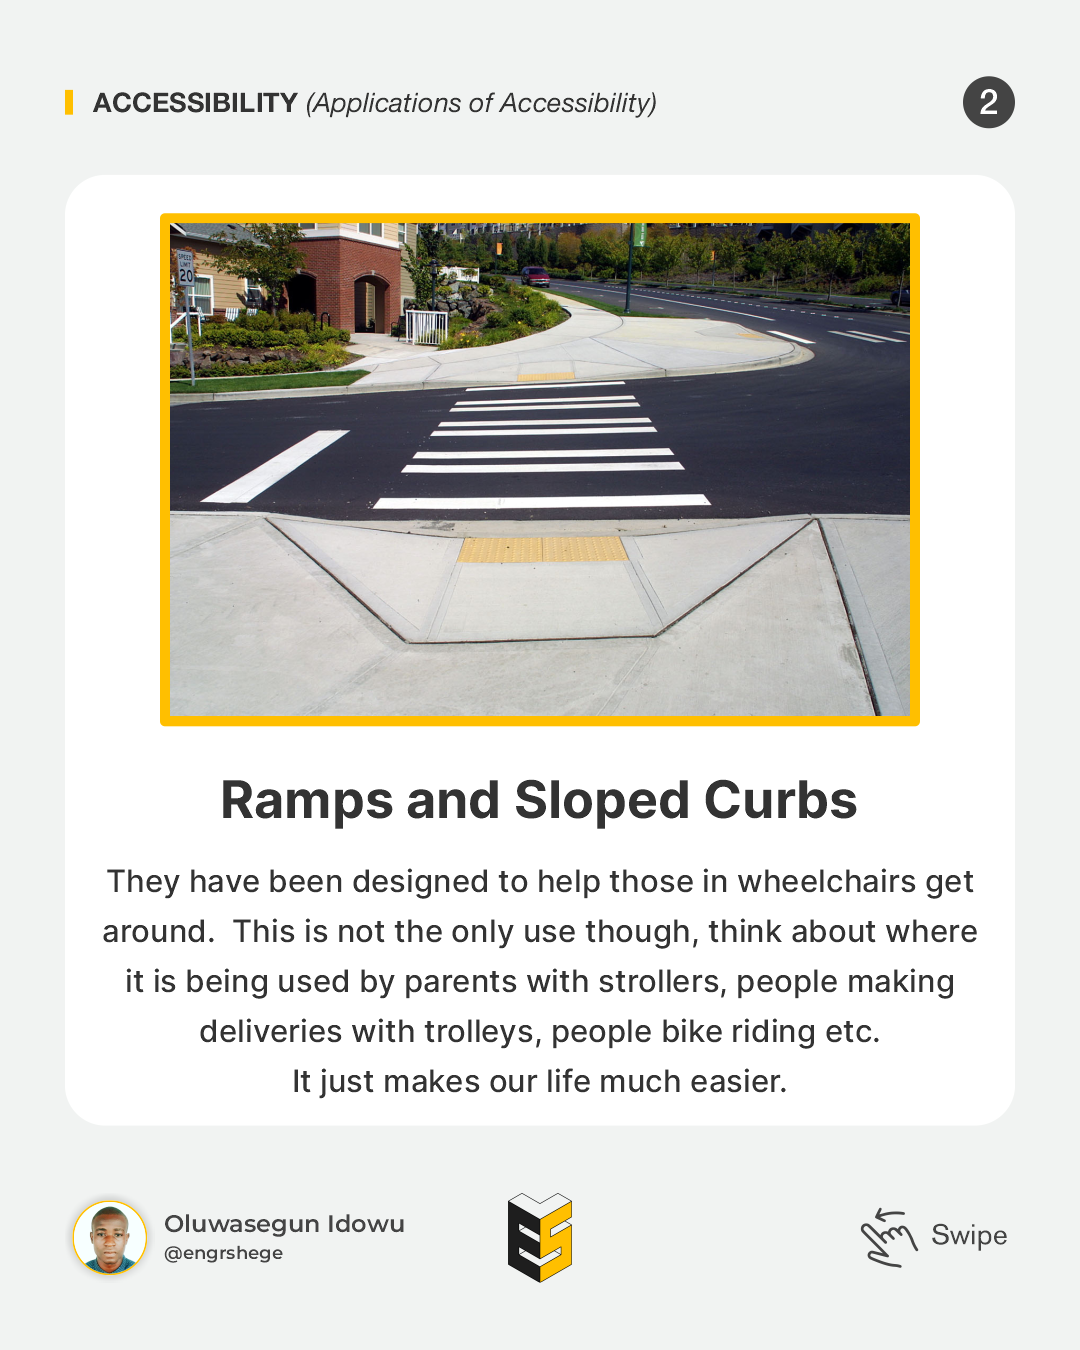 2. Applications of Accessibility (Ramps and Sloped Curbs)